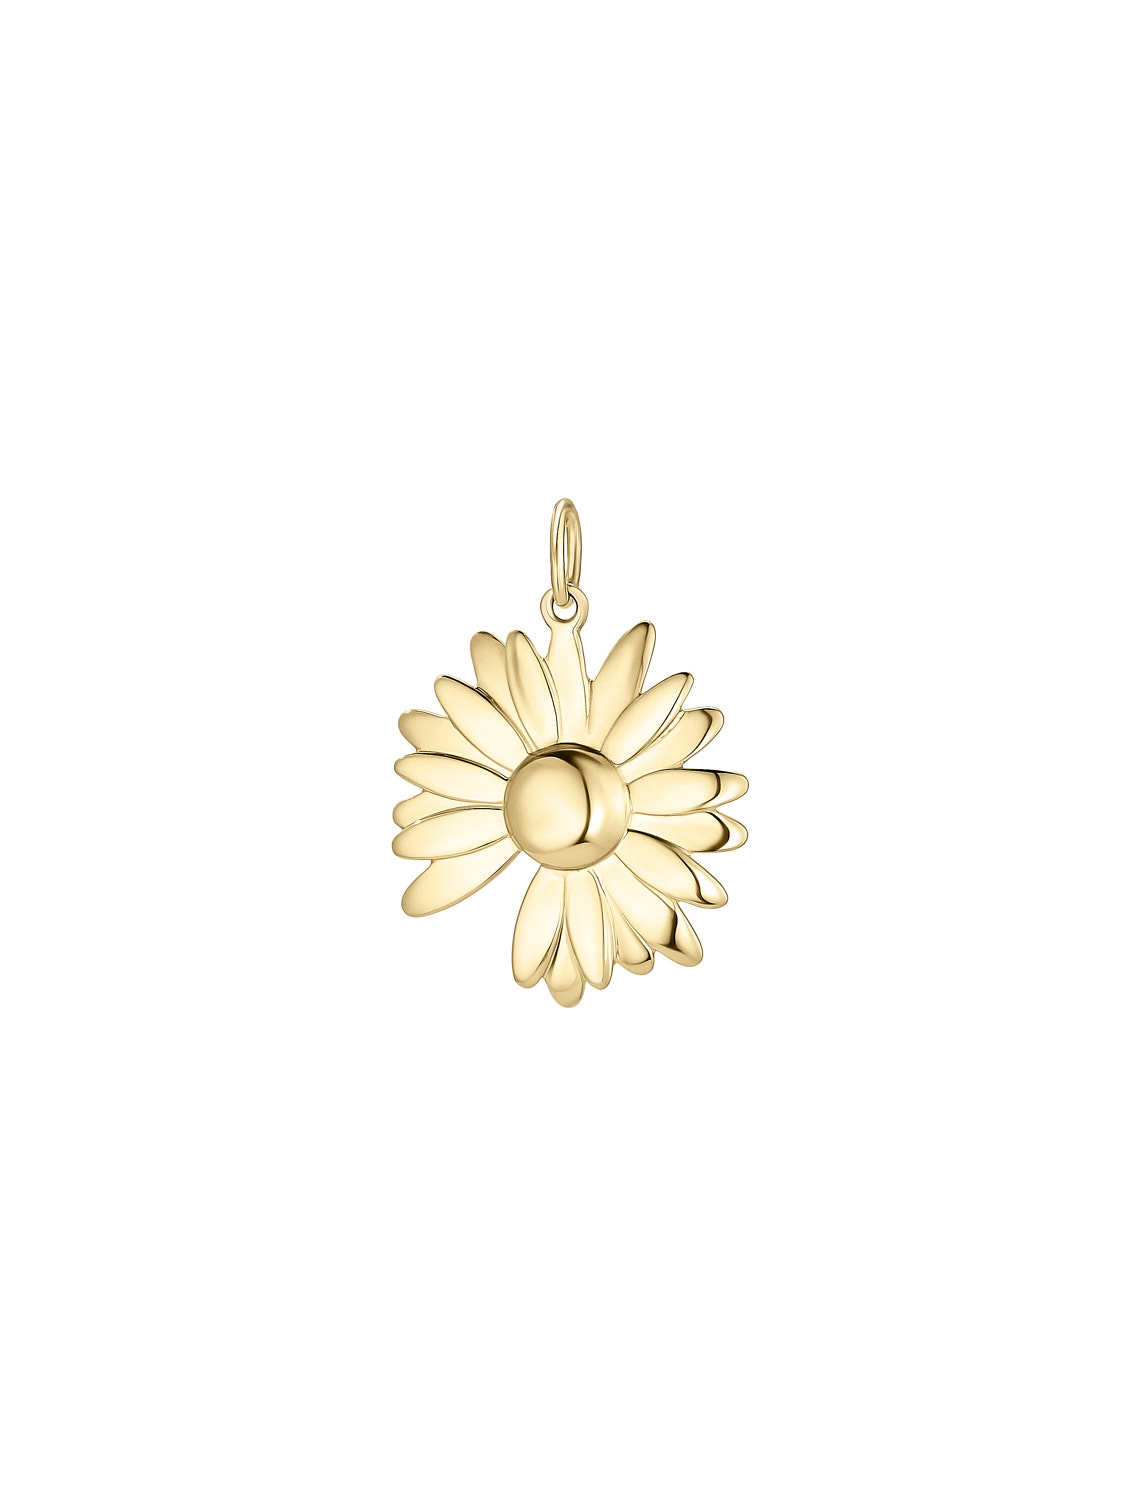 DAISY MISSING A PETAL GOLD-PLATED TRINKET  